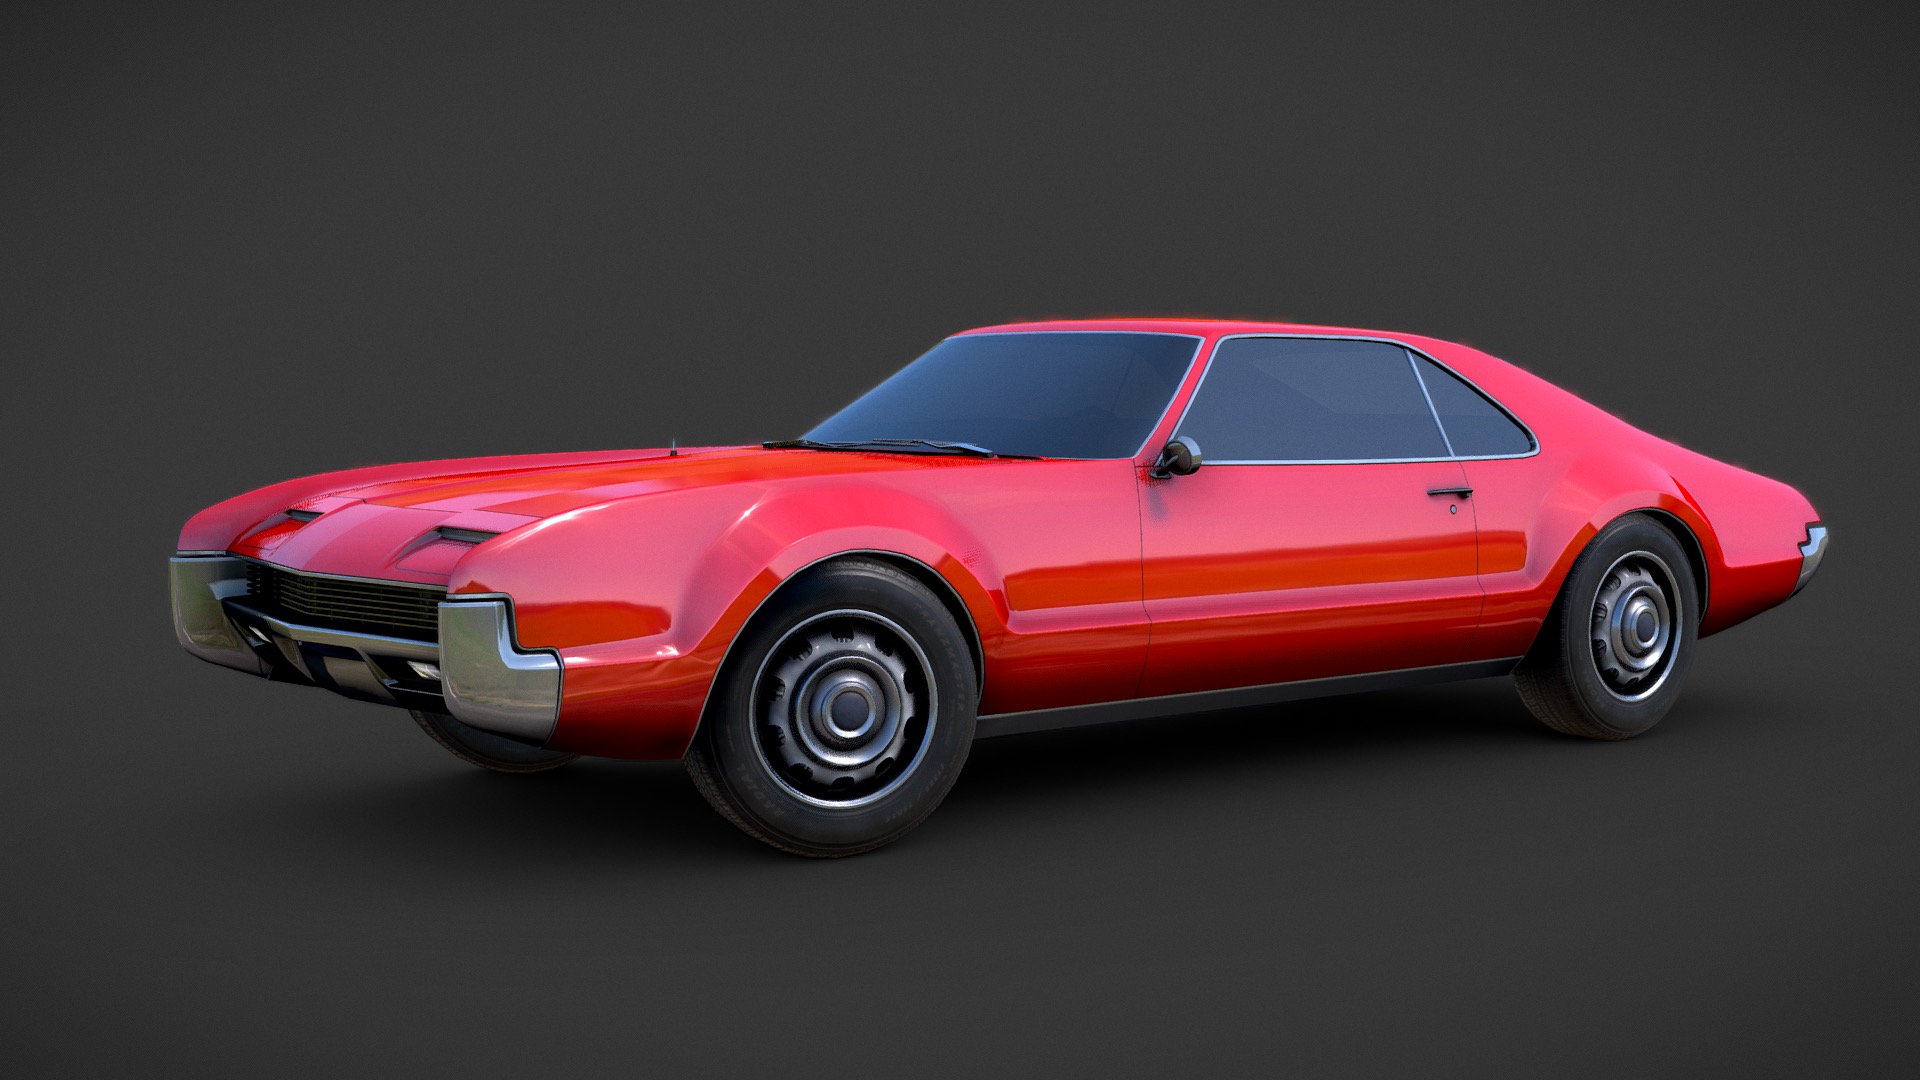 3D model Oldsmobile Toronado - This is a 3D model of the Oldsmobile Toronado. The 3D model is about a red car with a black background.